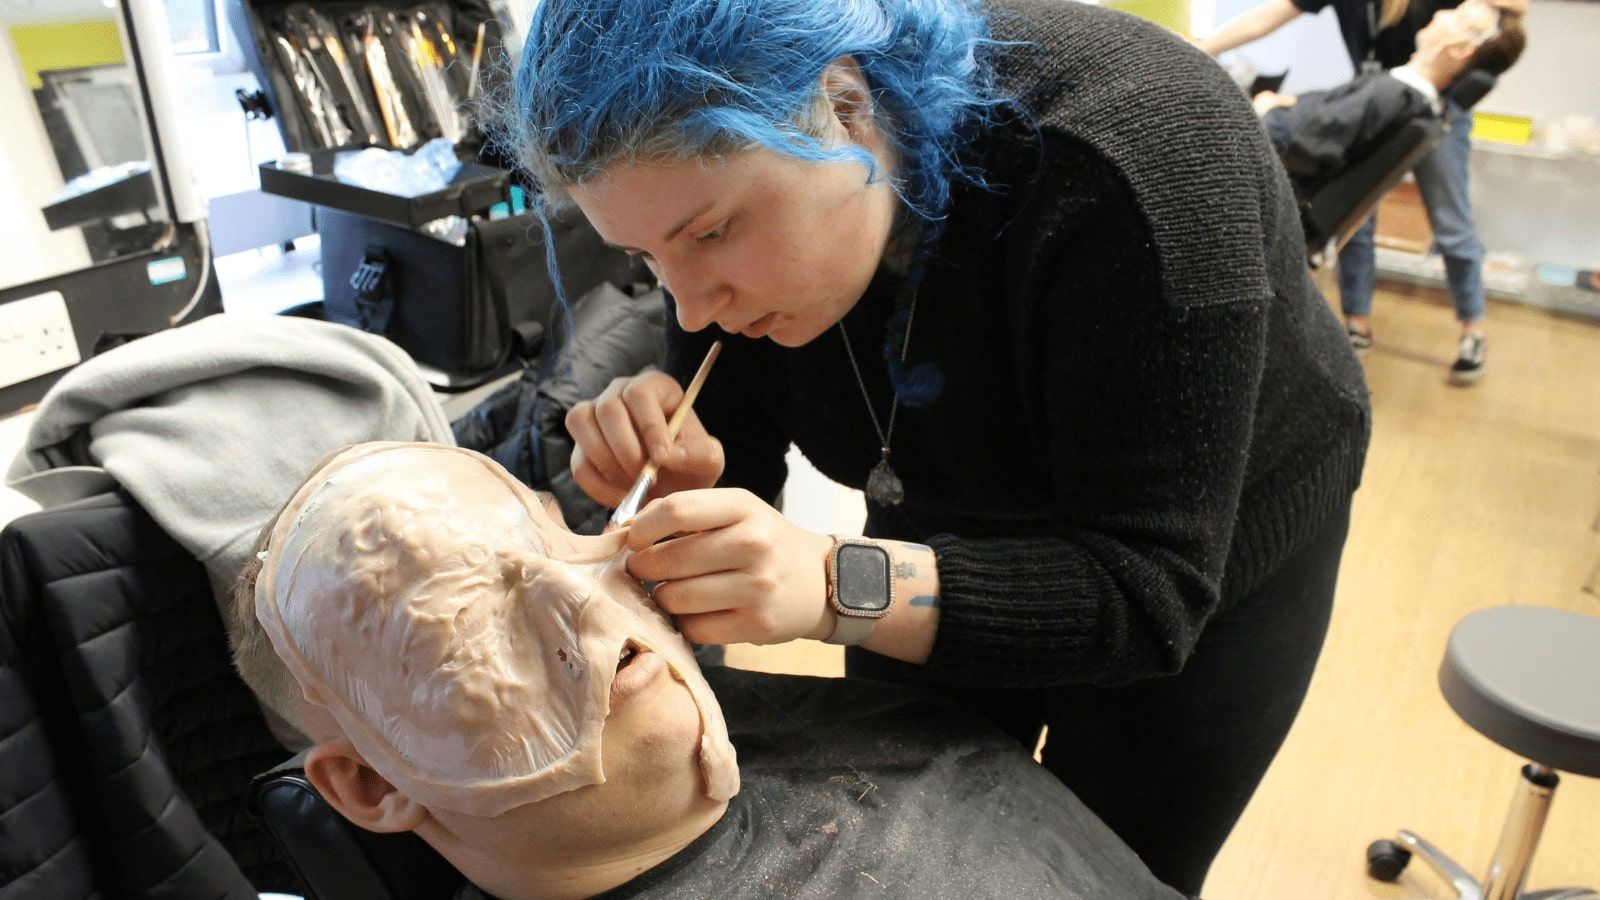 A Special Effects student working on the face of a willing volunteer.